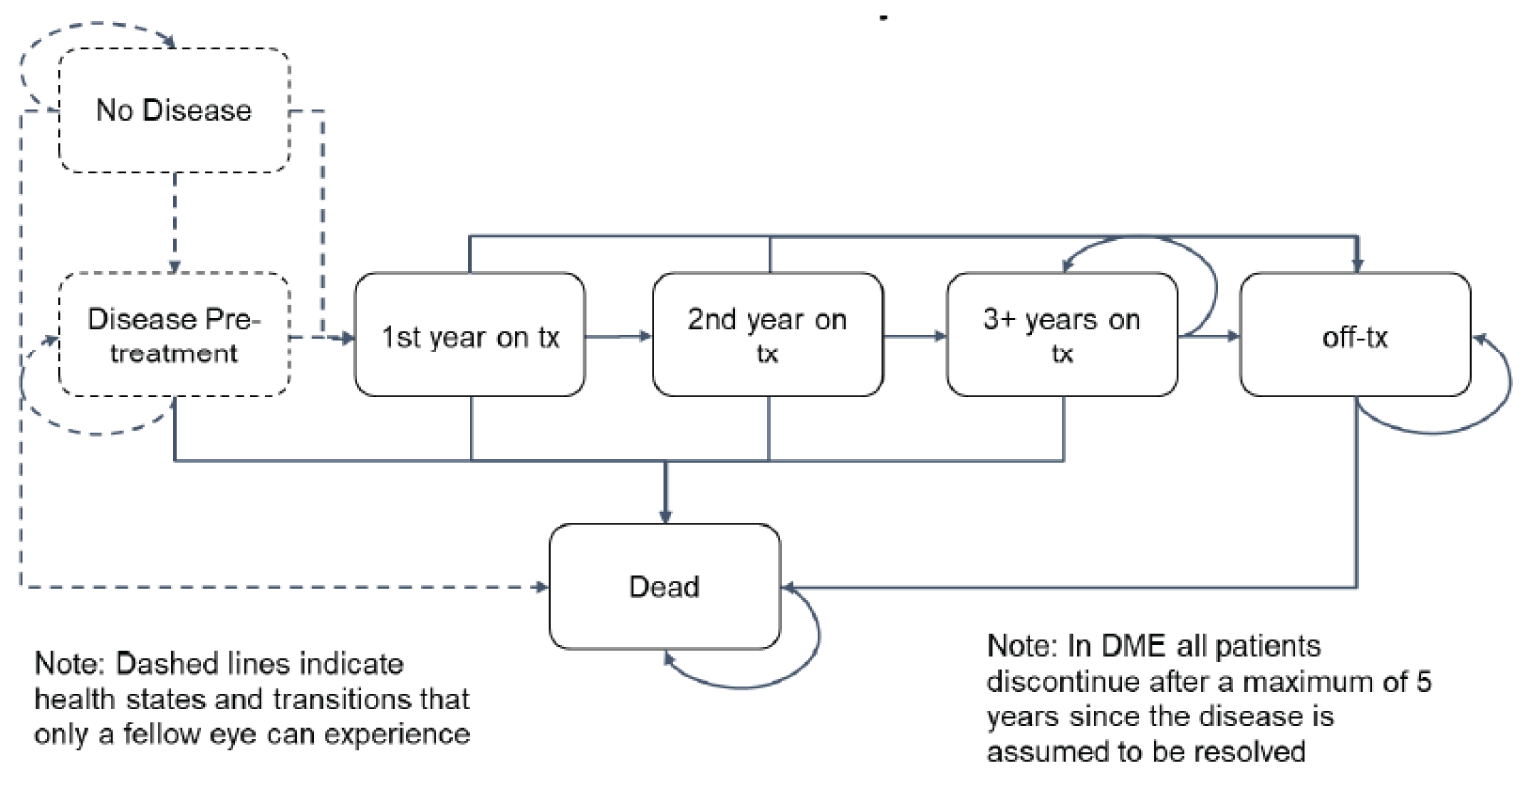 Flow diagram showing how patients move in the model over the 5-year treatment period.